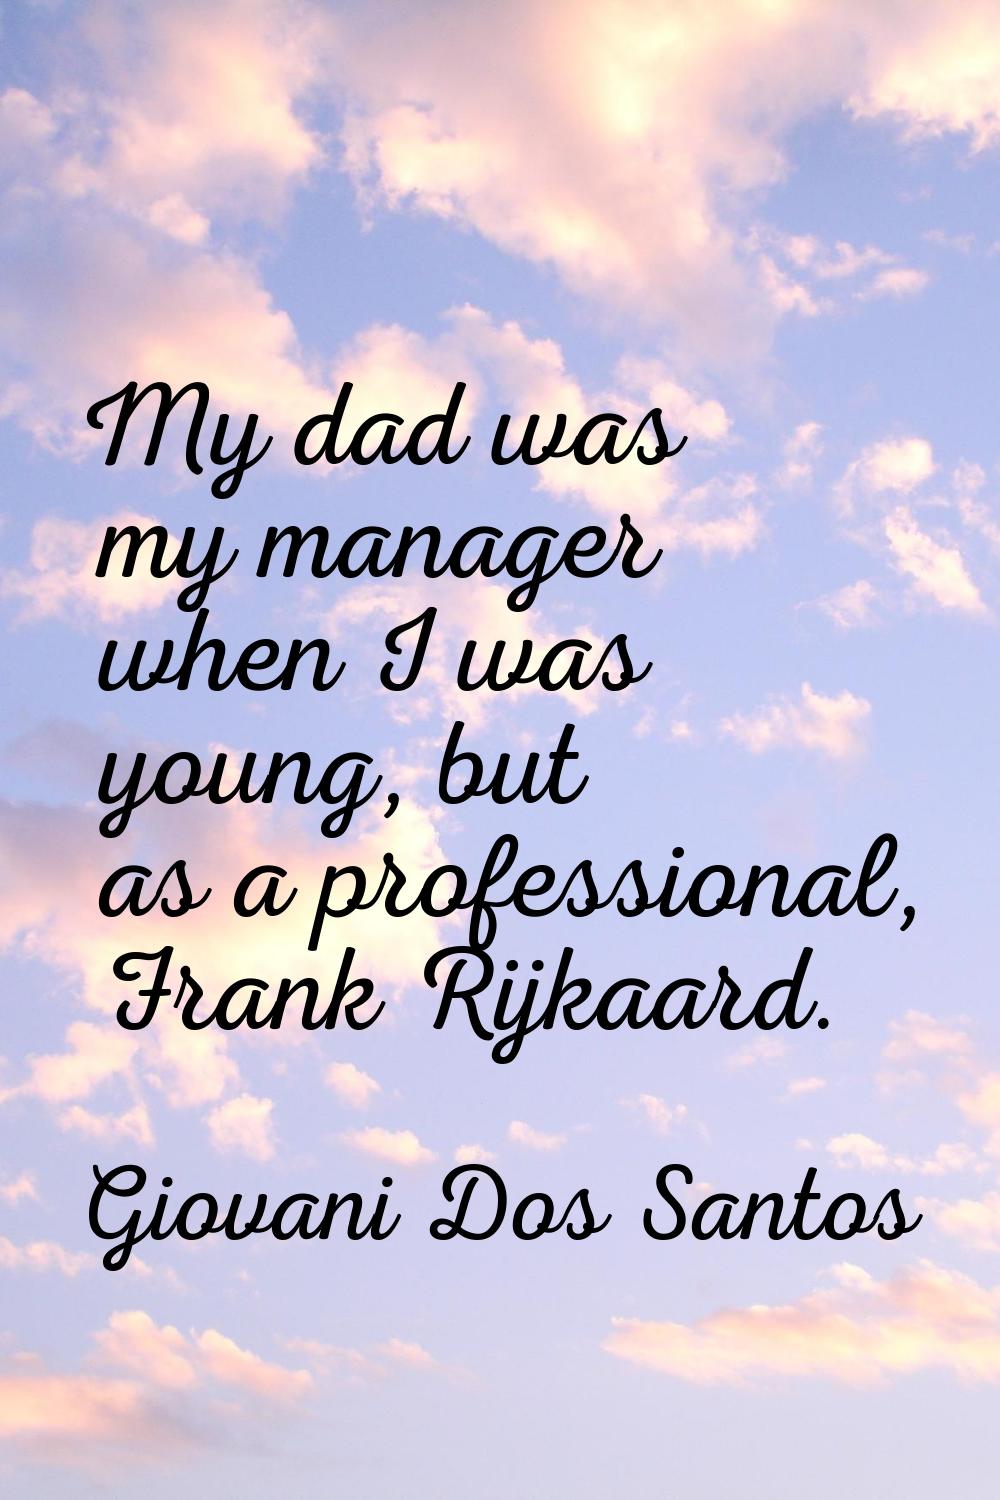 My dad was my manager when I was young, but as a professional, Frank Rijkaard.